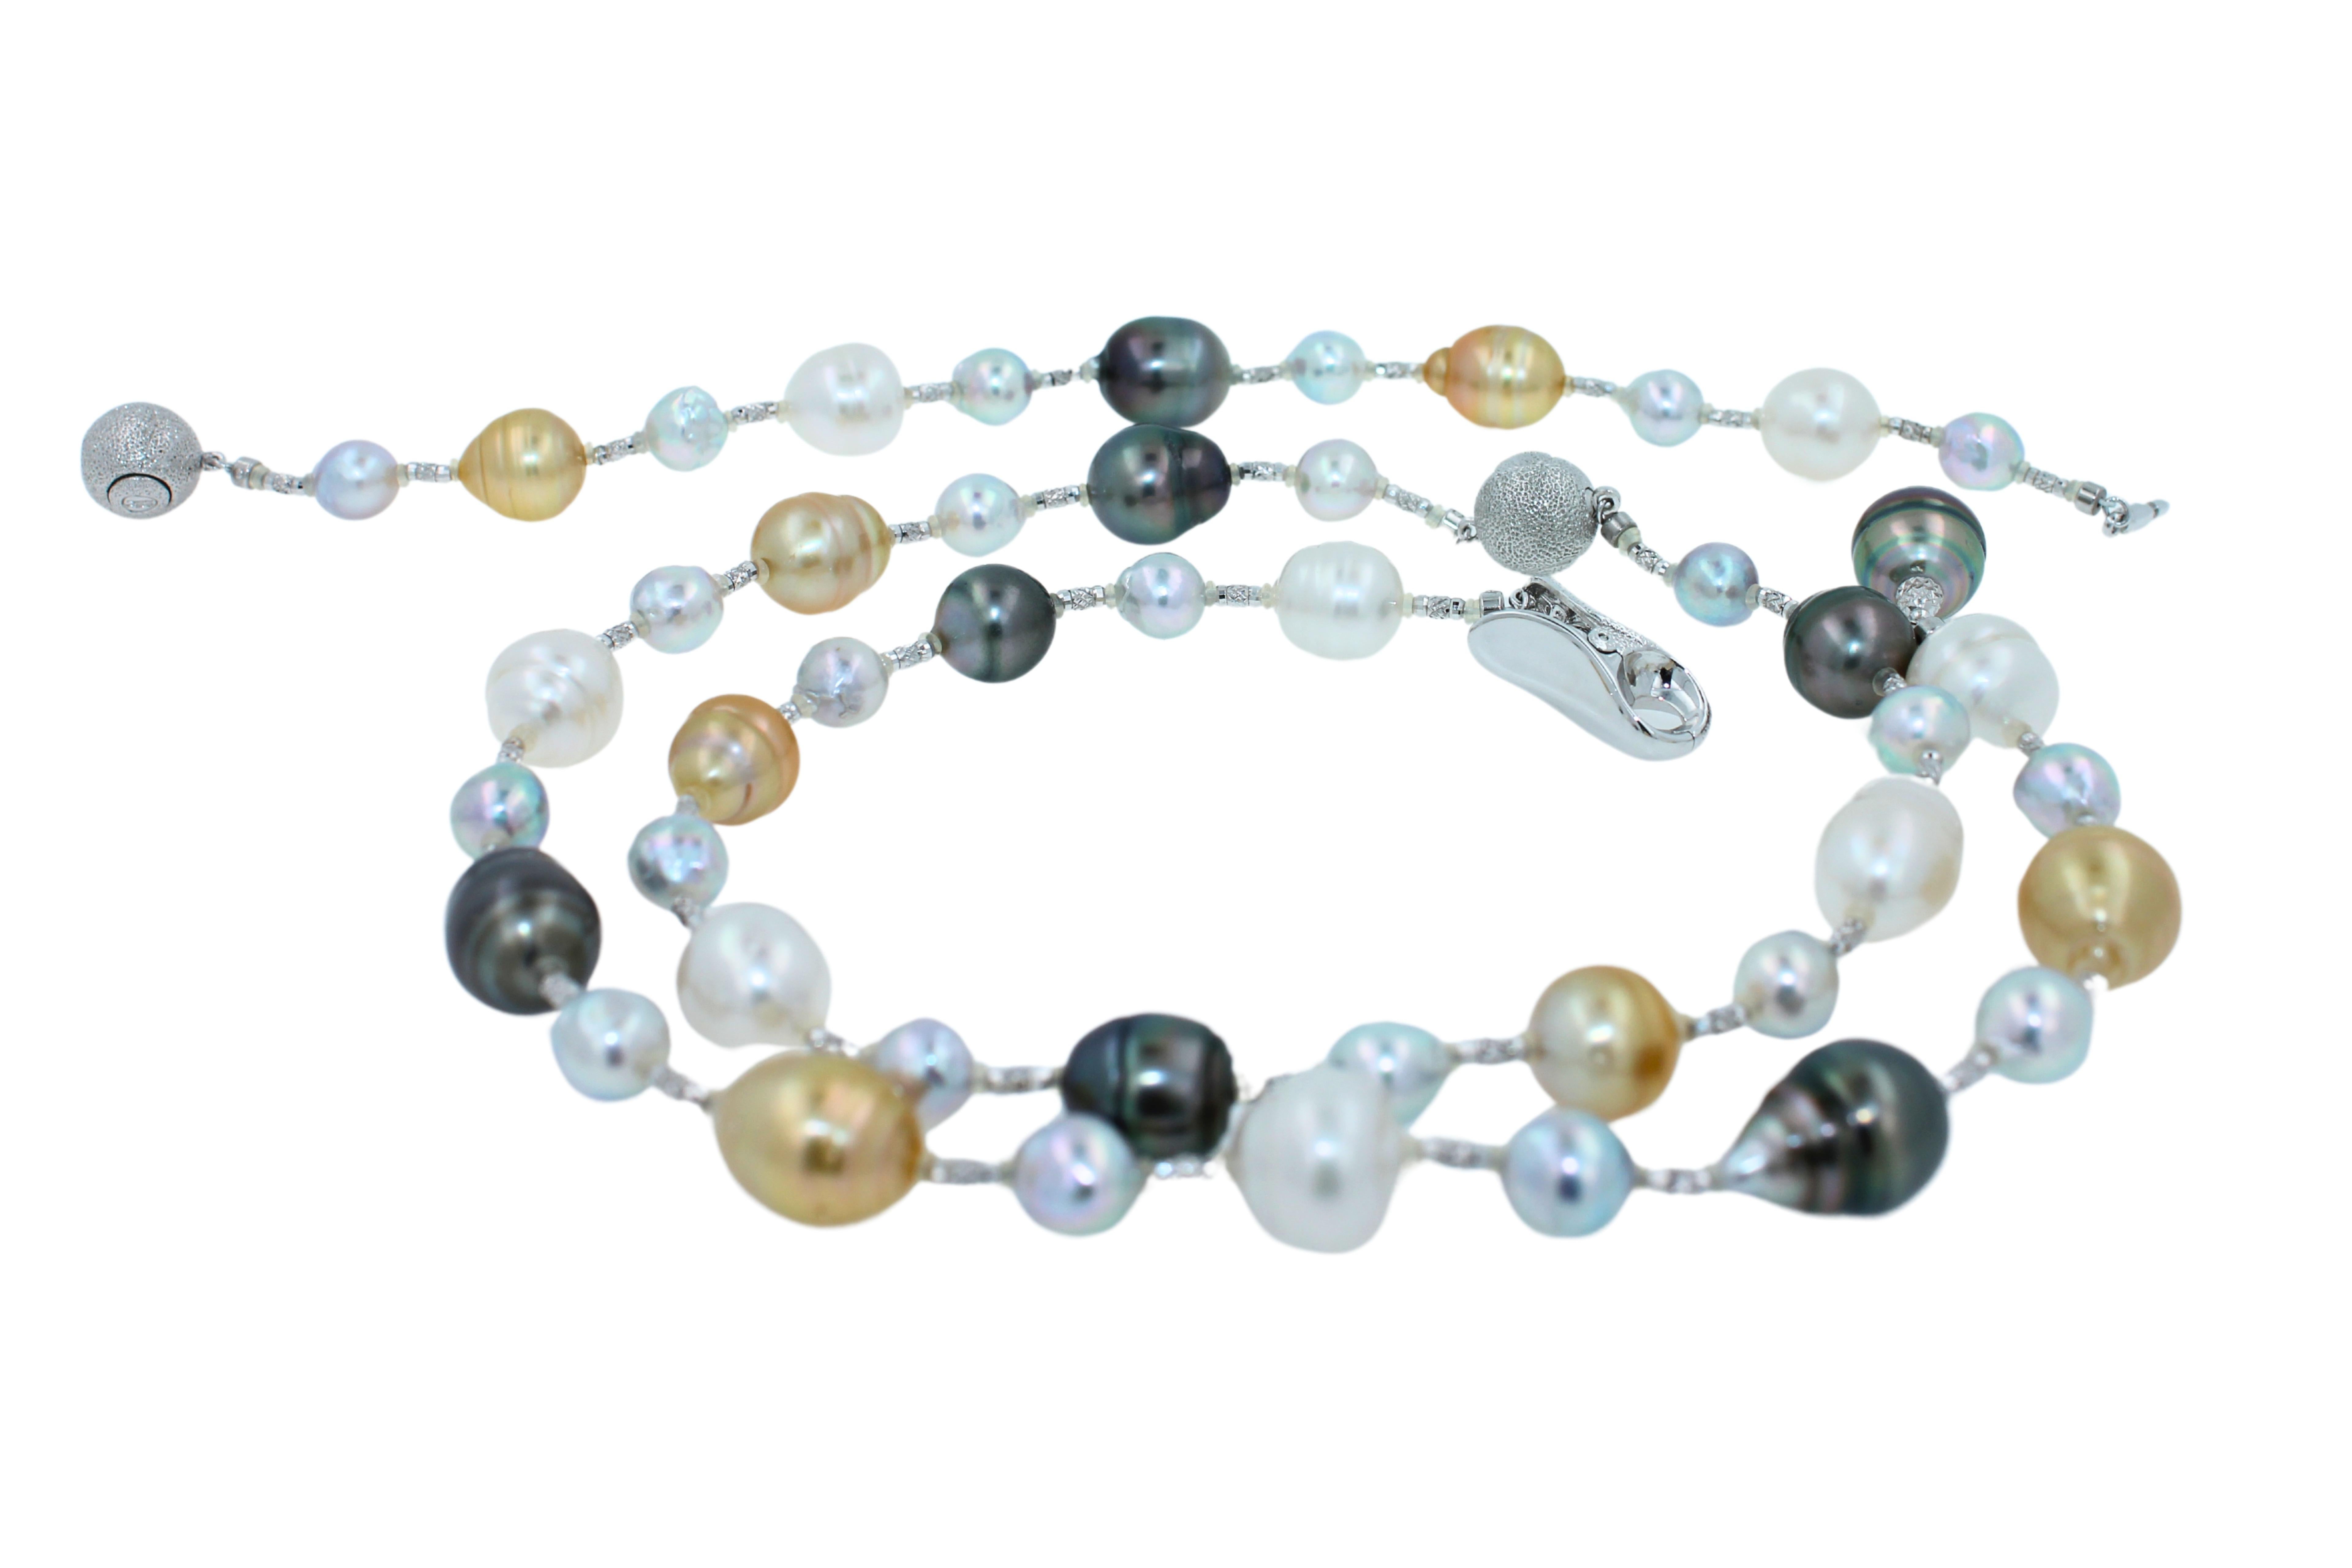 Yellow White South Sea Tahitian Pearls Gold Adjustable Lariat Necklace Bracelet For Sale 6